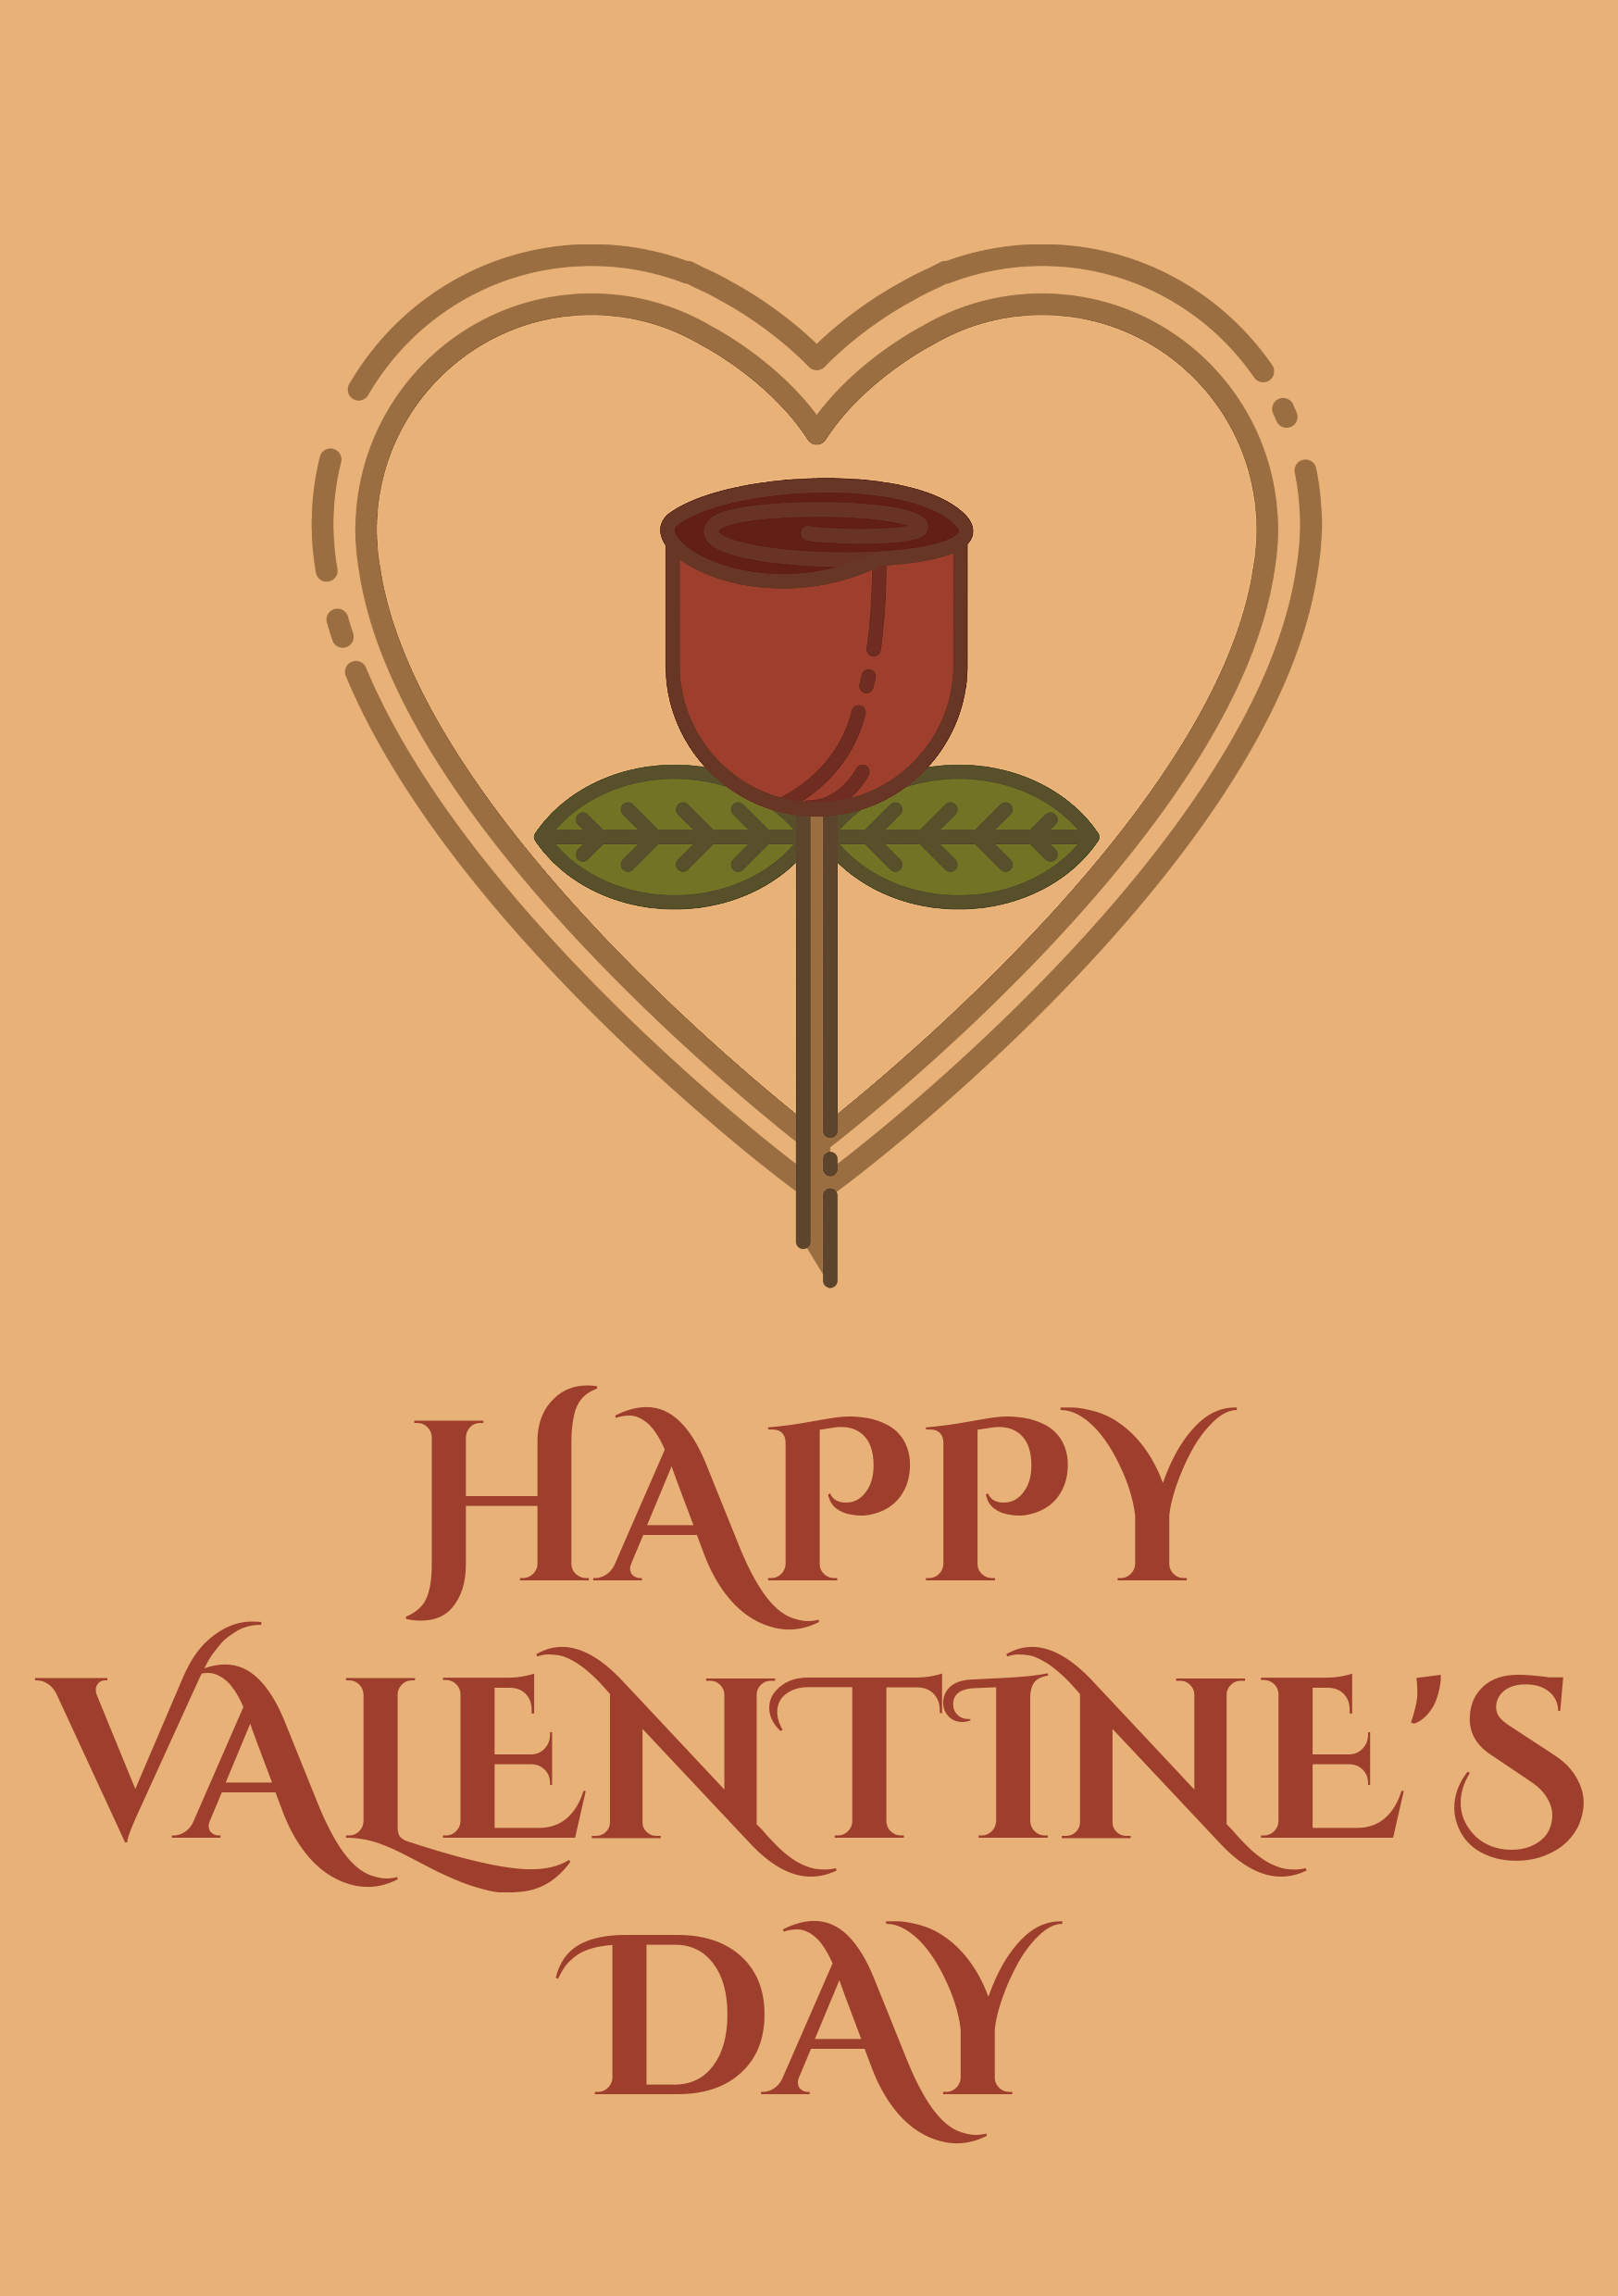 Happy Valentine's Day design with rose and heart shape - Valentine's Day graphic design inspiration - Image